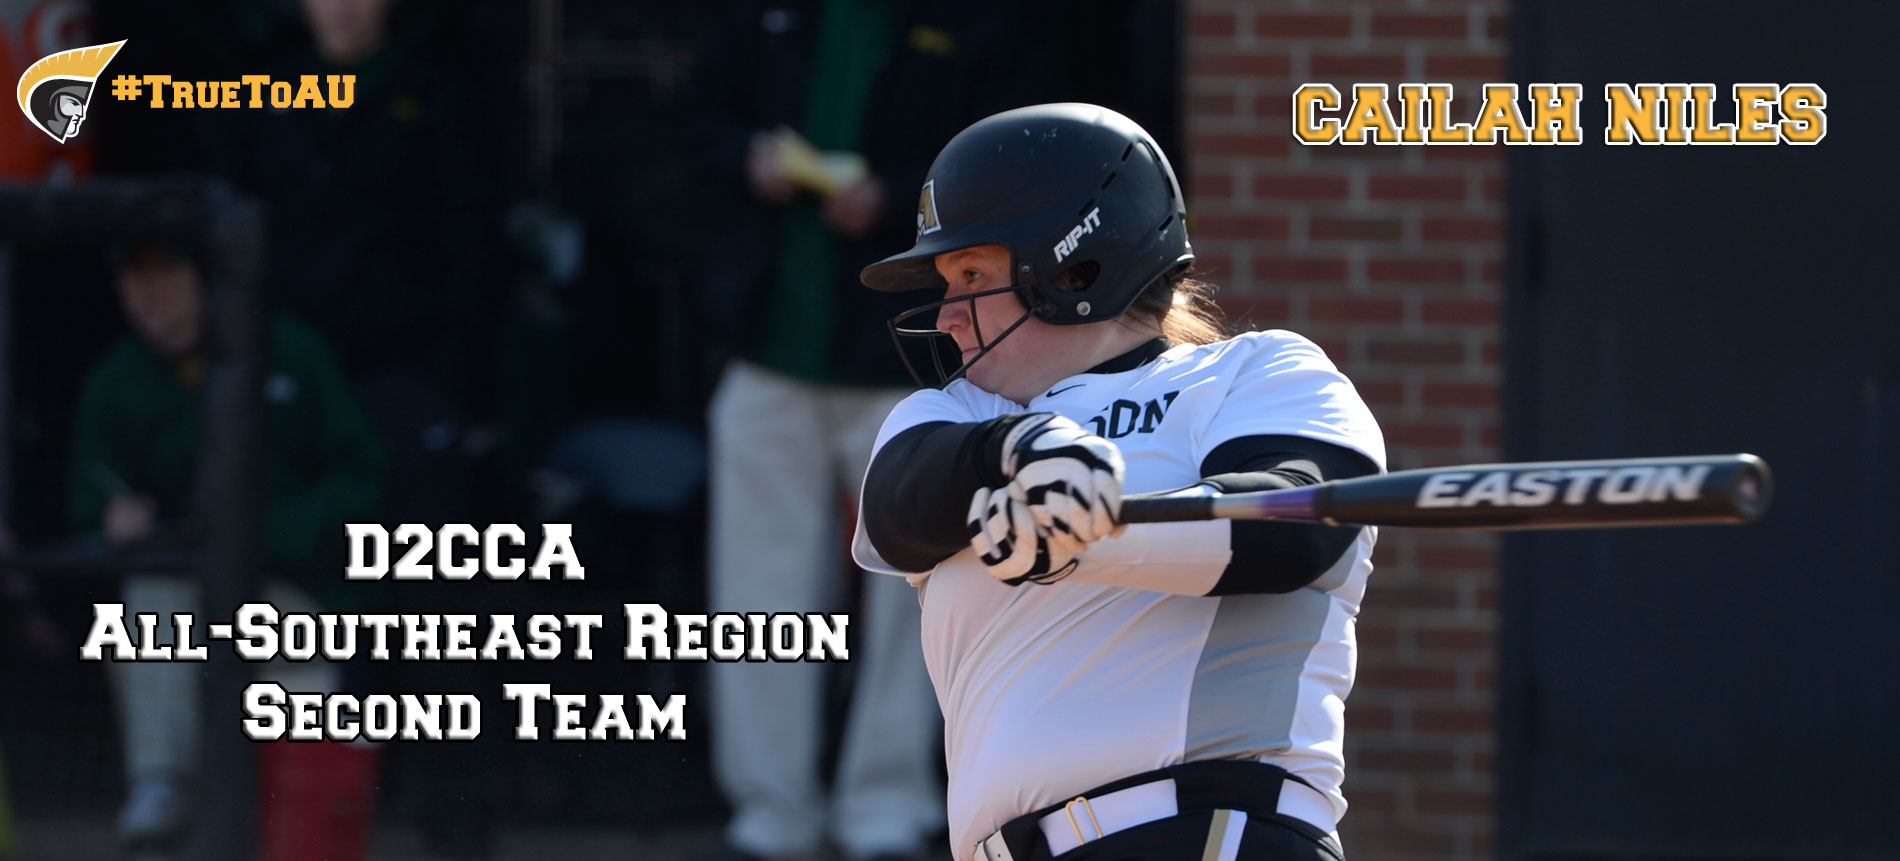 Niles Named 2016 Division II Conference Commissioners Association (D2CCA) Softball All-Southeast Region